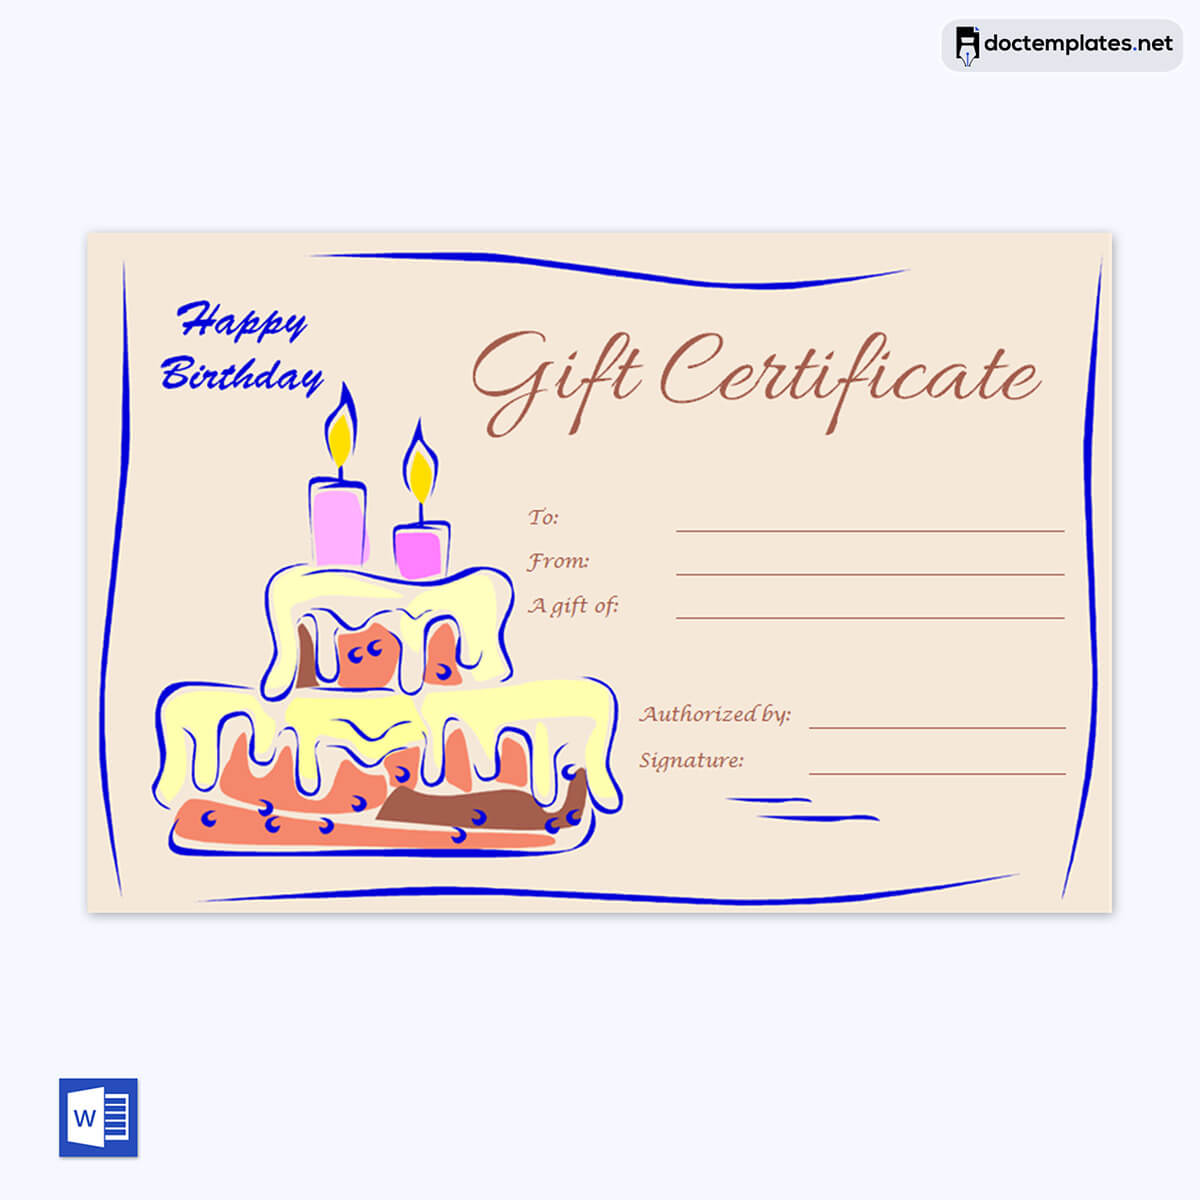 Candles-and-Cake-Birthday-Gift-pr2